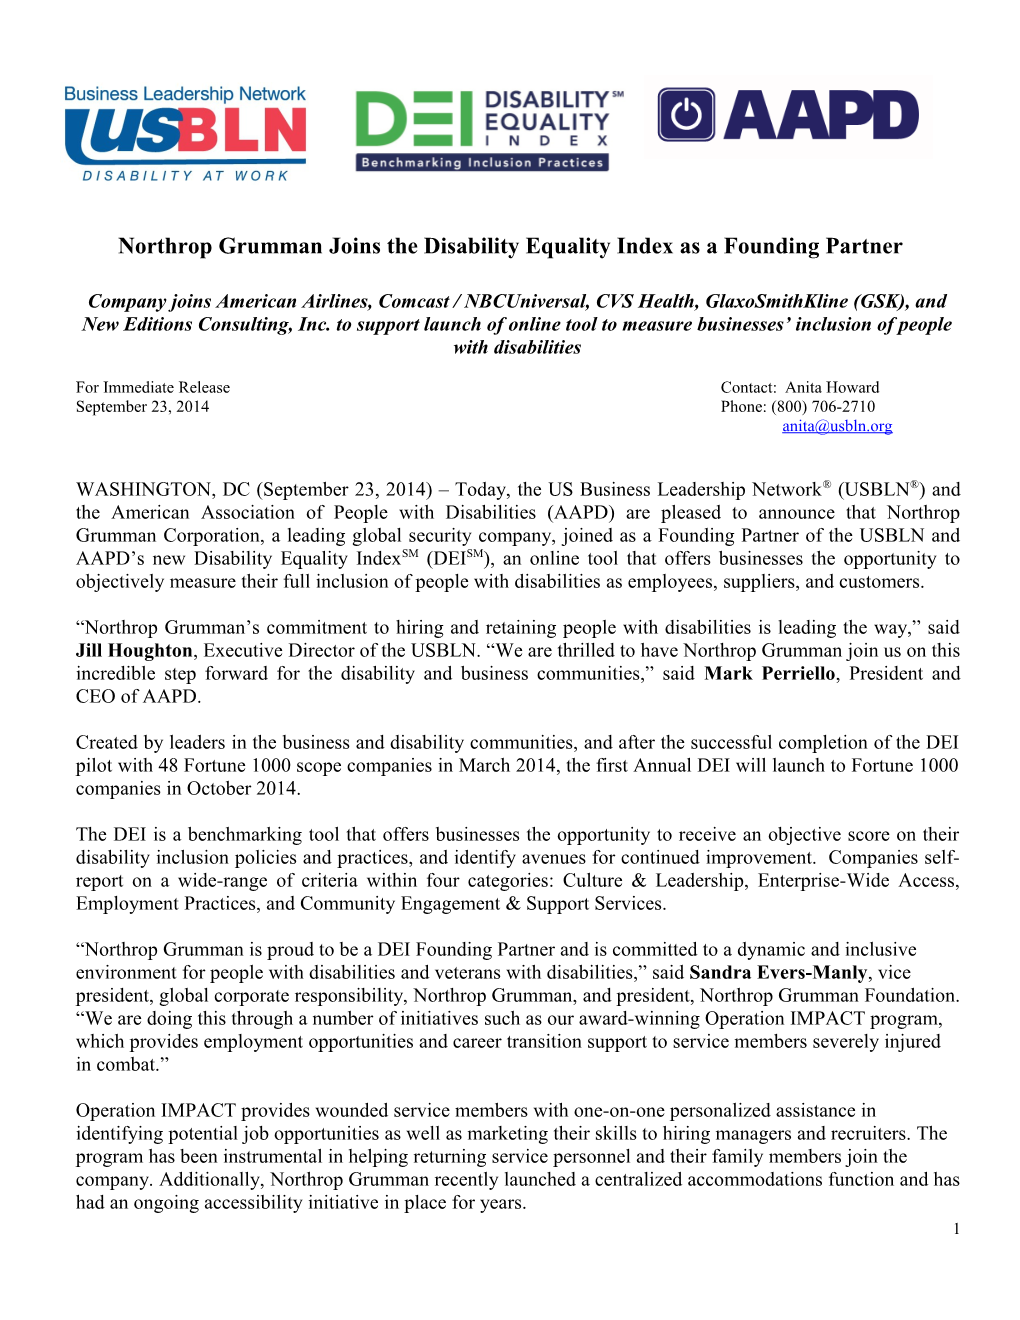 Northrop Grumman Joins the Disability Equality Index As a Founding Partner